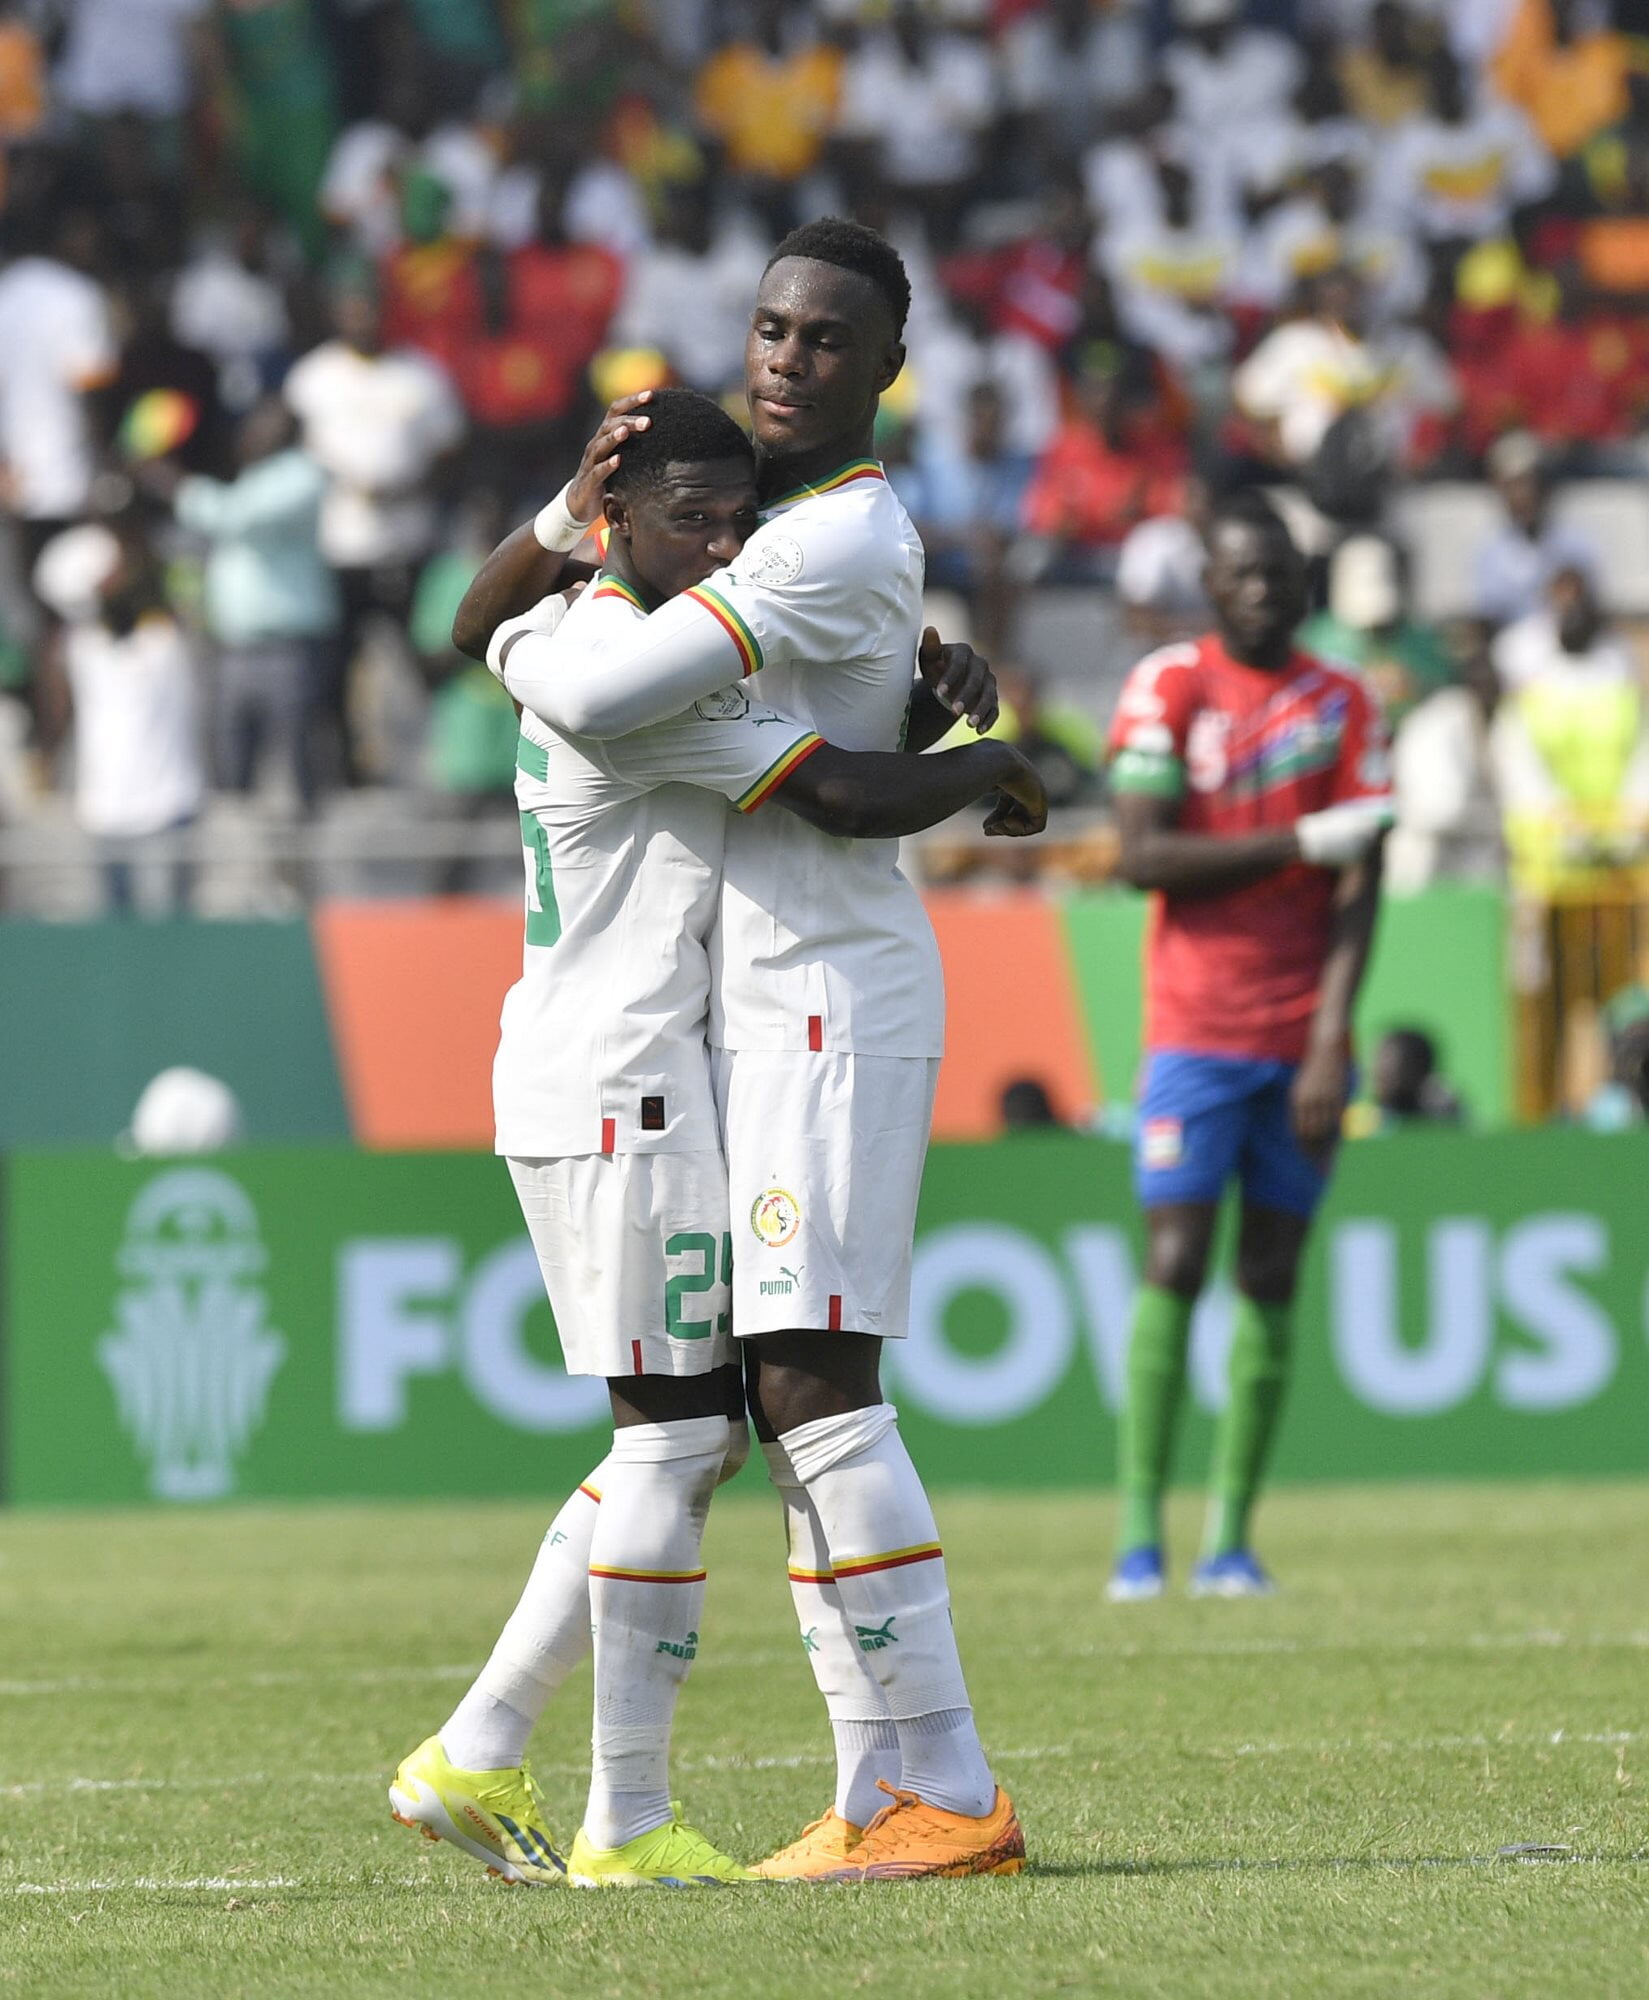 Ligue 1 stars shine in AFCON and Asian Cup action